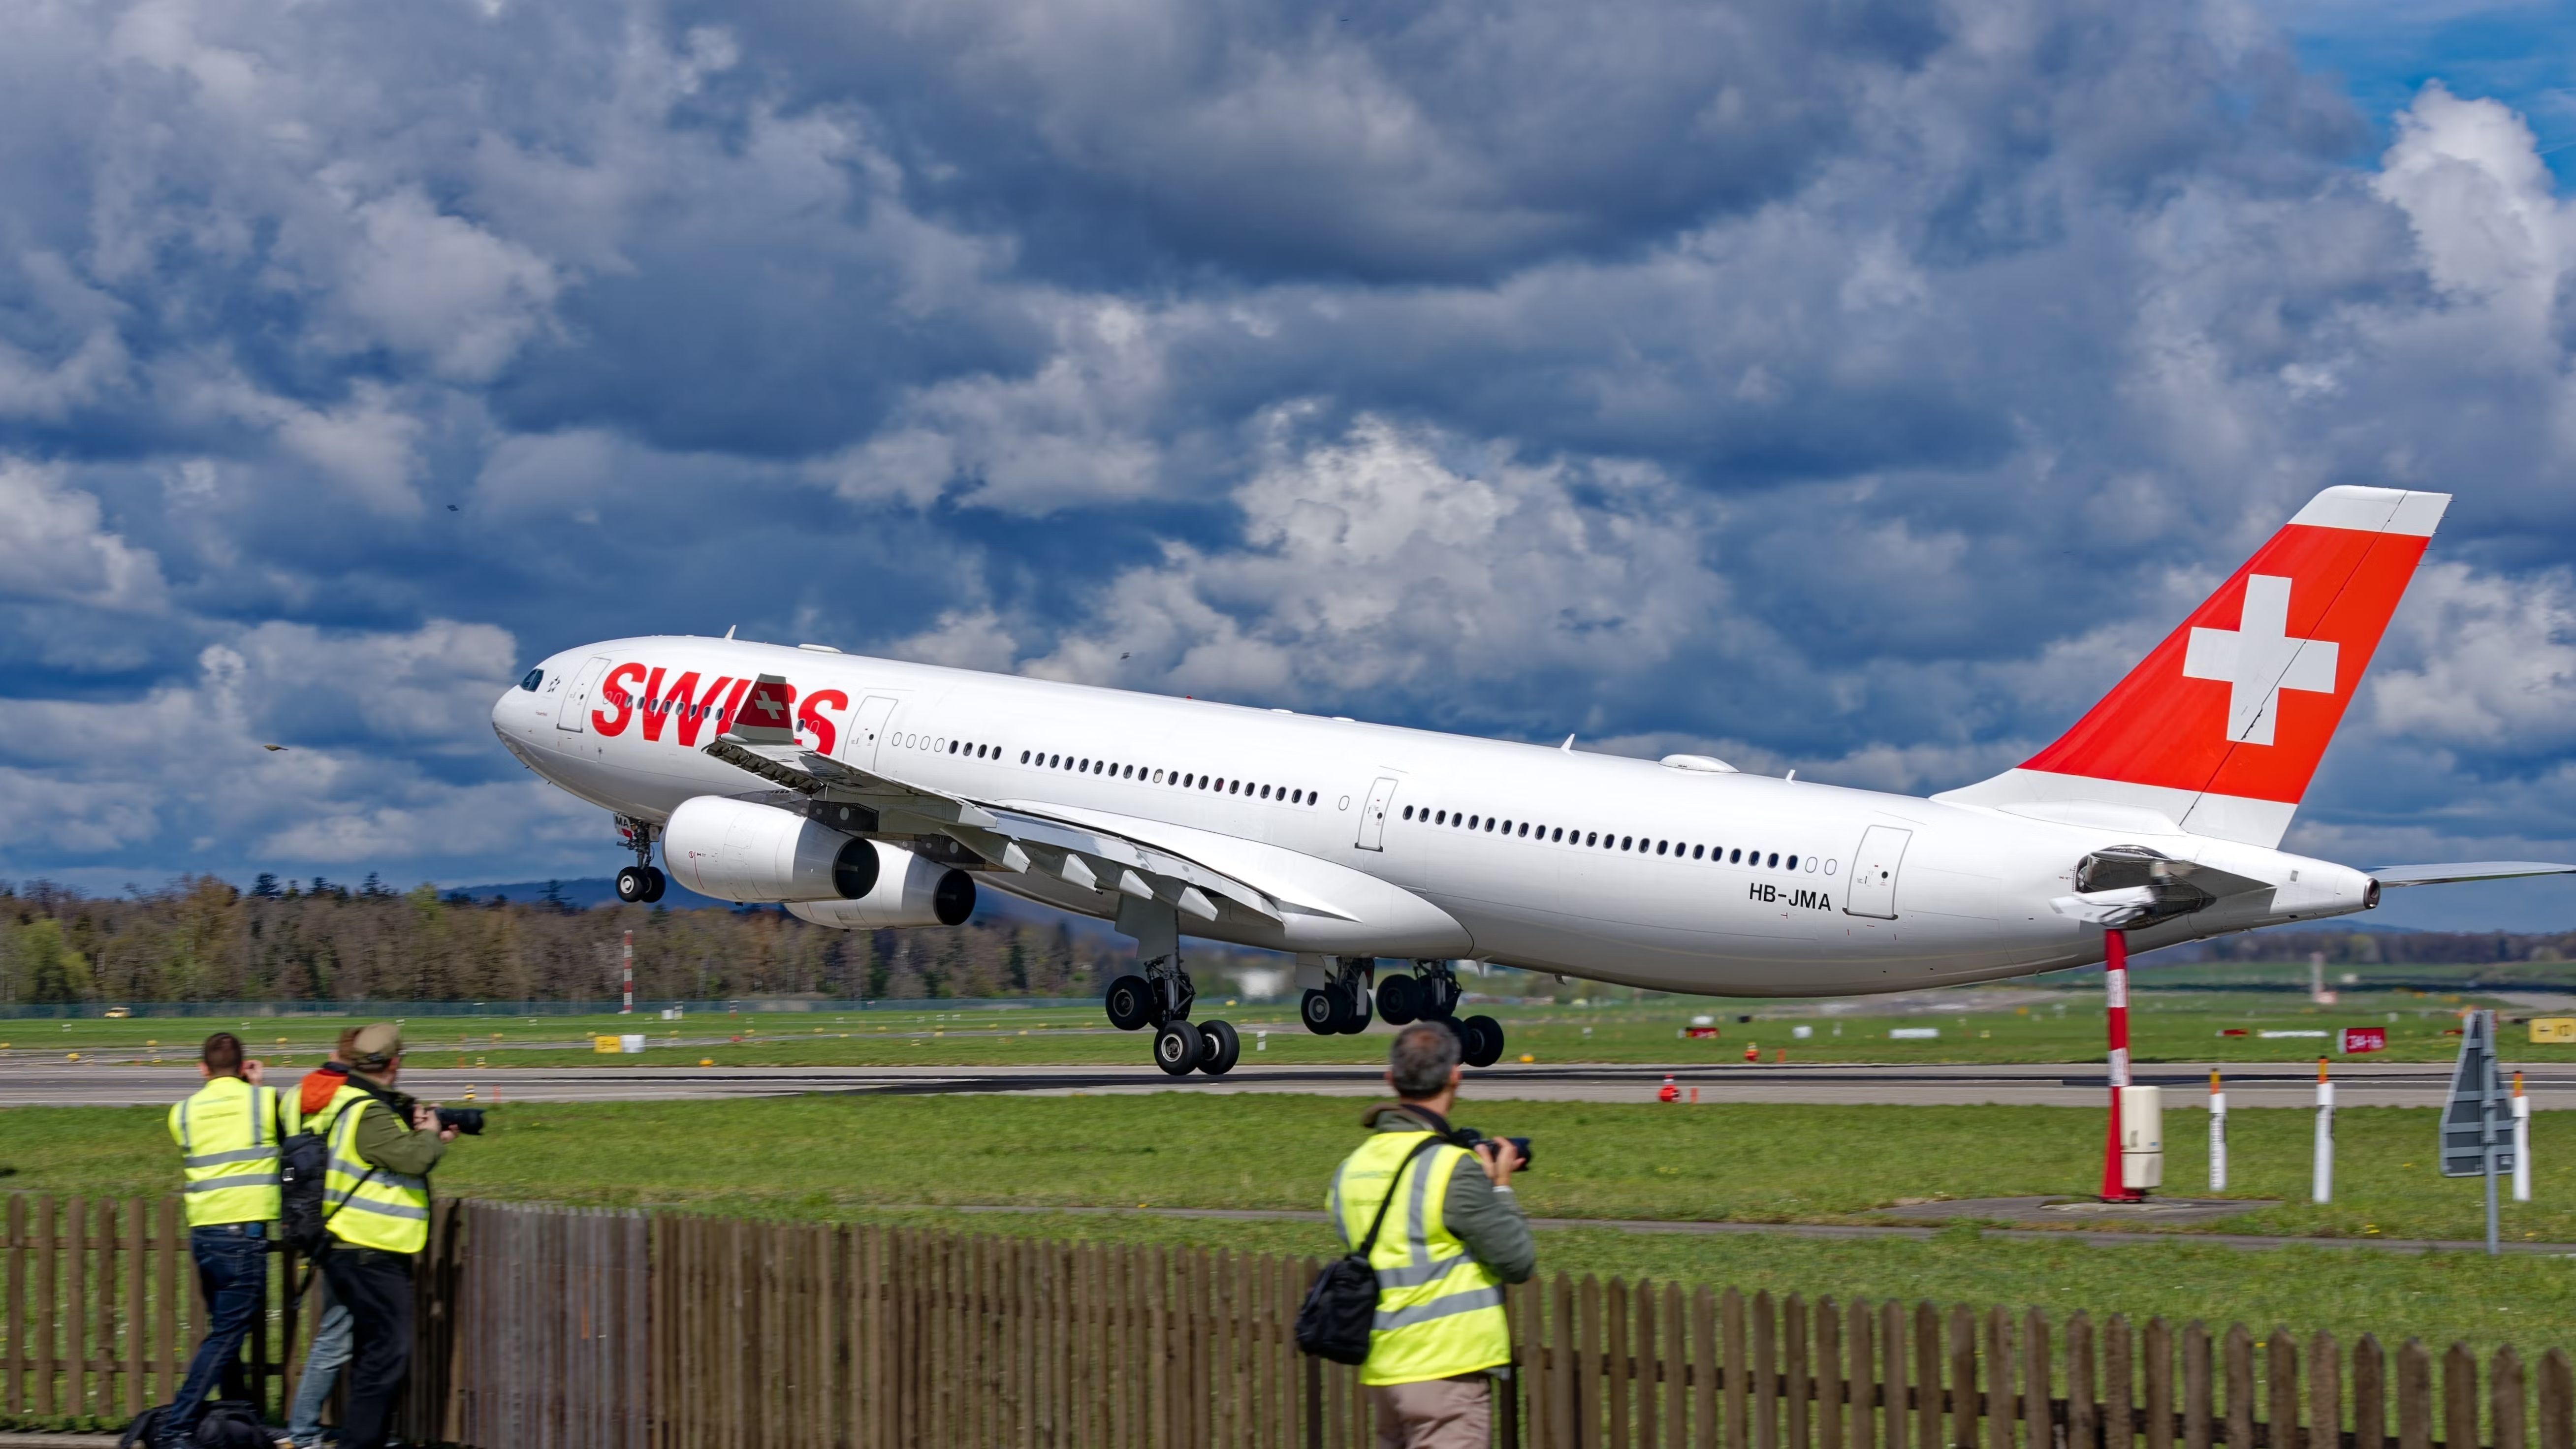 SWISS Is Planning Airbus A340 Flights To Seoul Incheon Airport